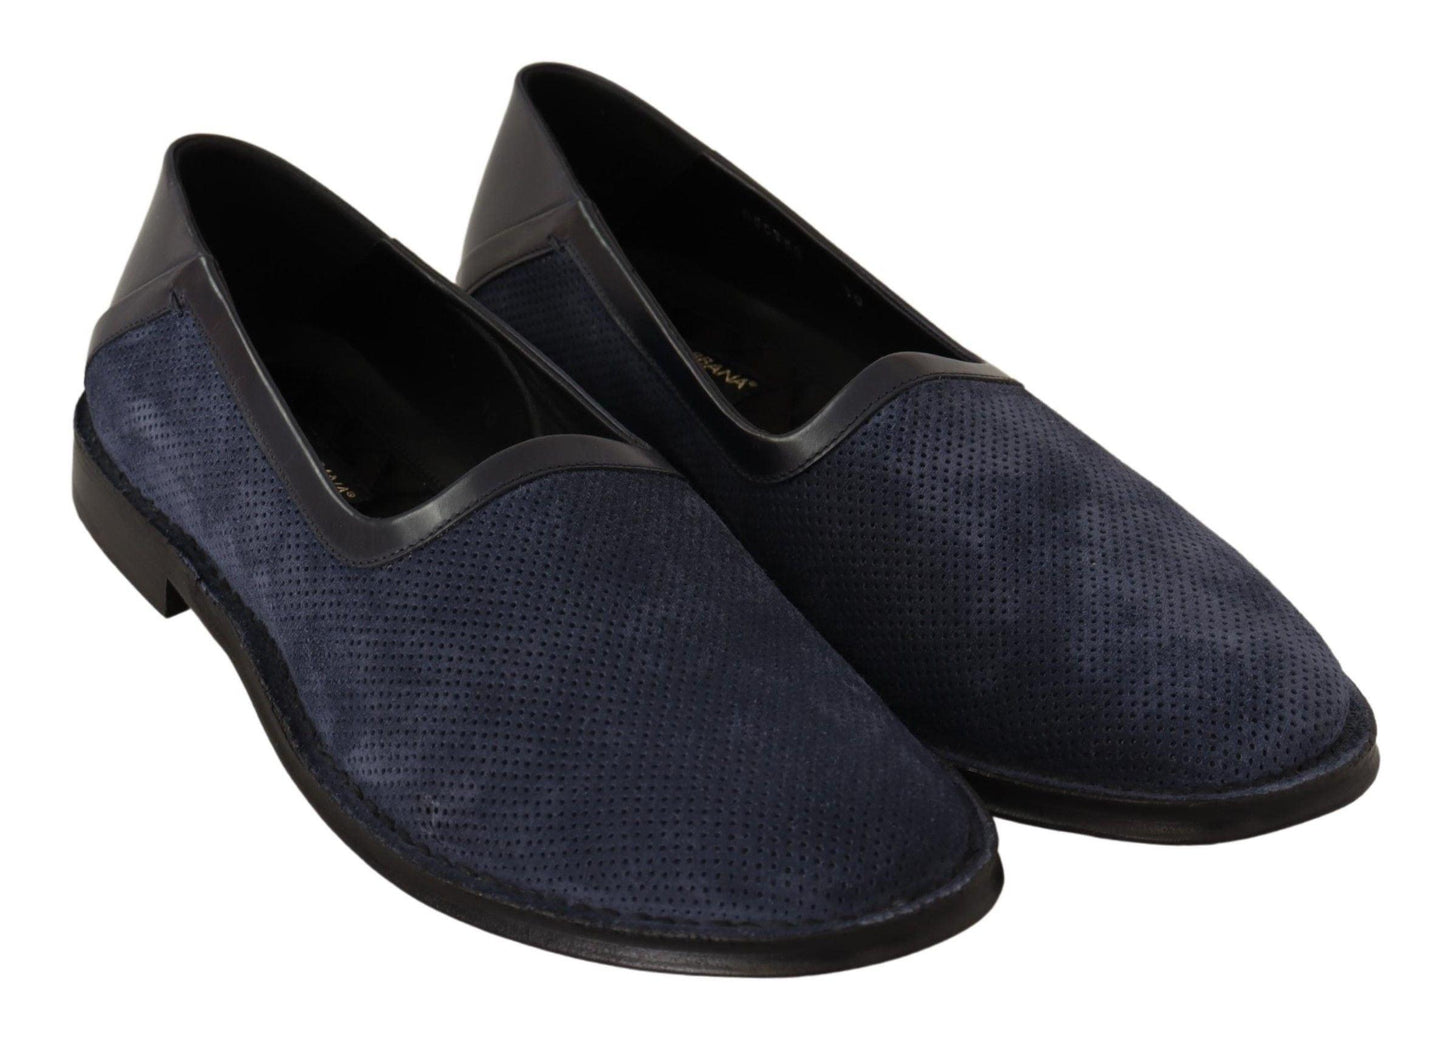 Blue Leather Perforated Slip On Loafers Shoes - Designed by Dolce & Gabbana Available to Buy at a Discounted Price on Moon Behind The Hill Online Designer Discount Store